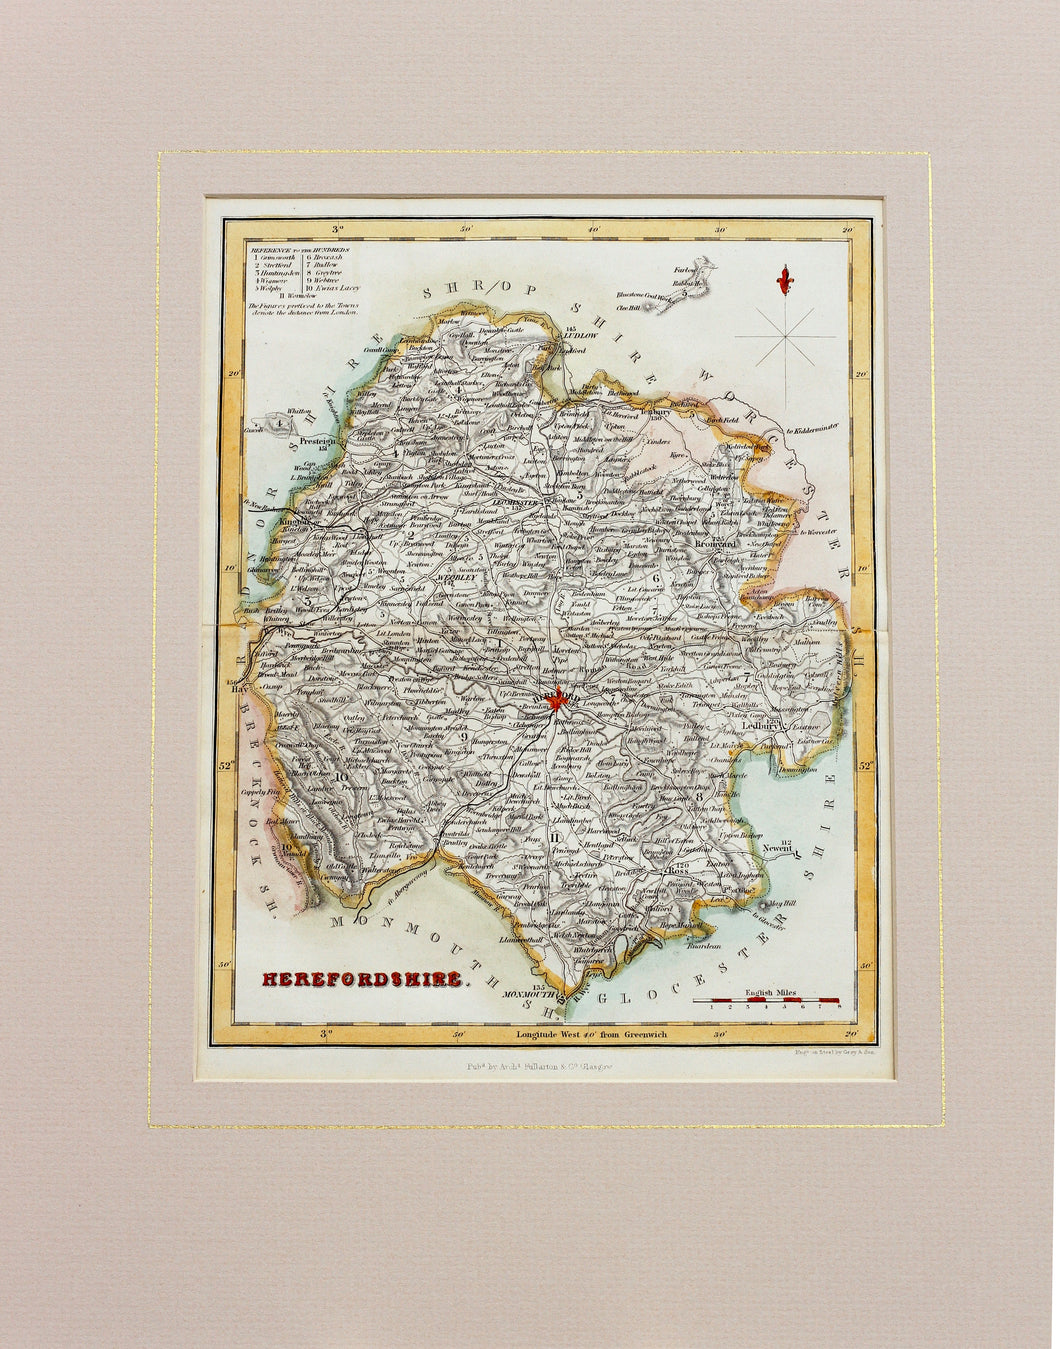 Herefordshire - Antique Map by Fullarton circa 1850